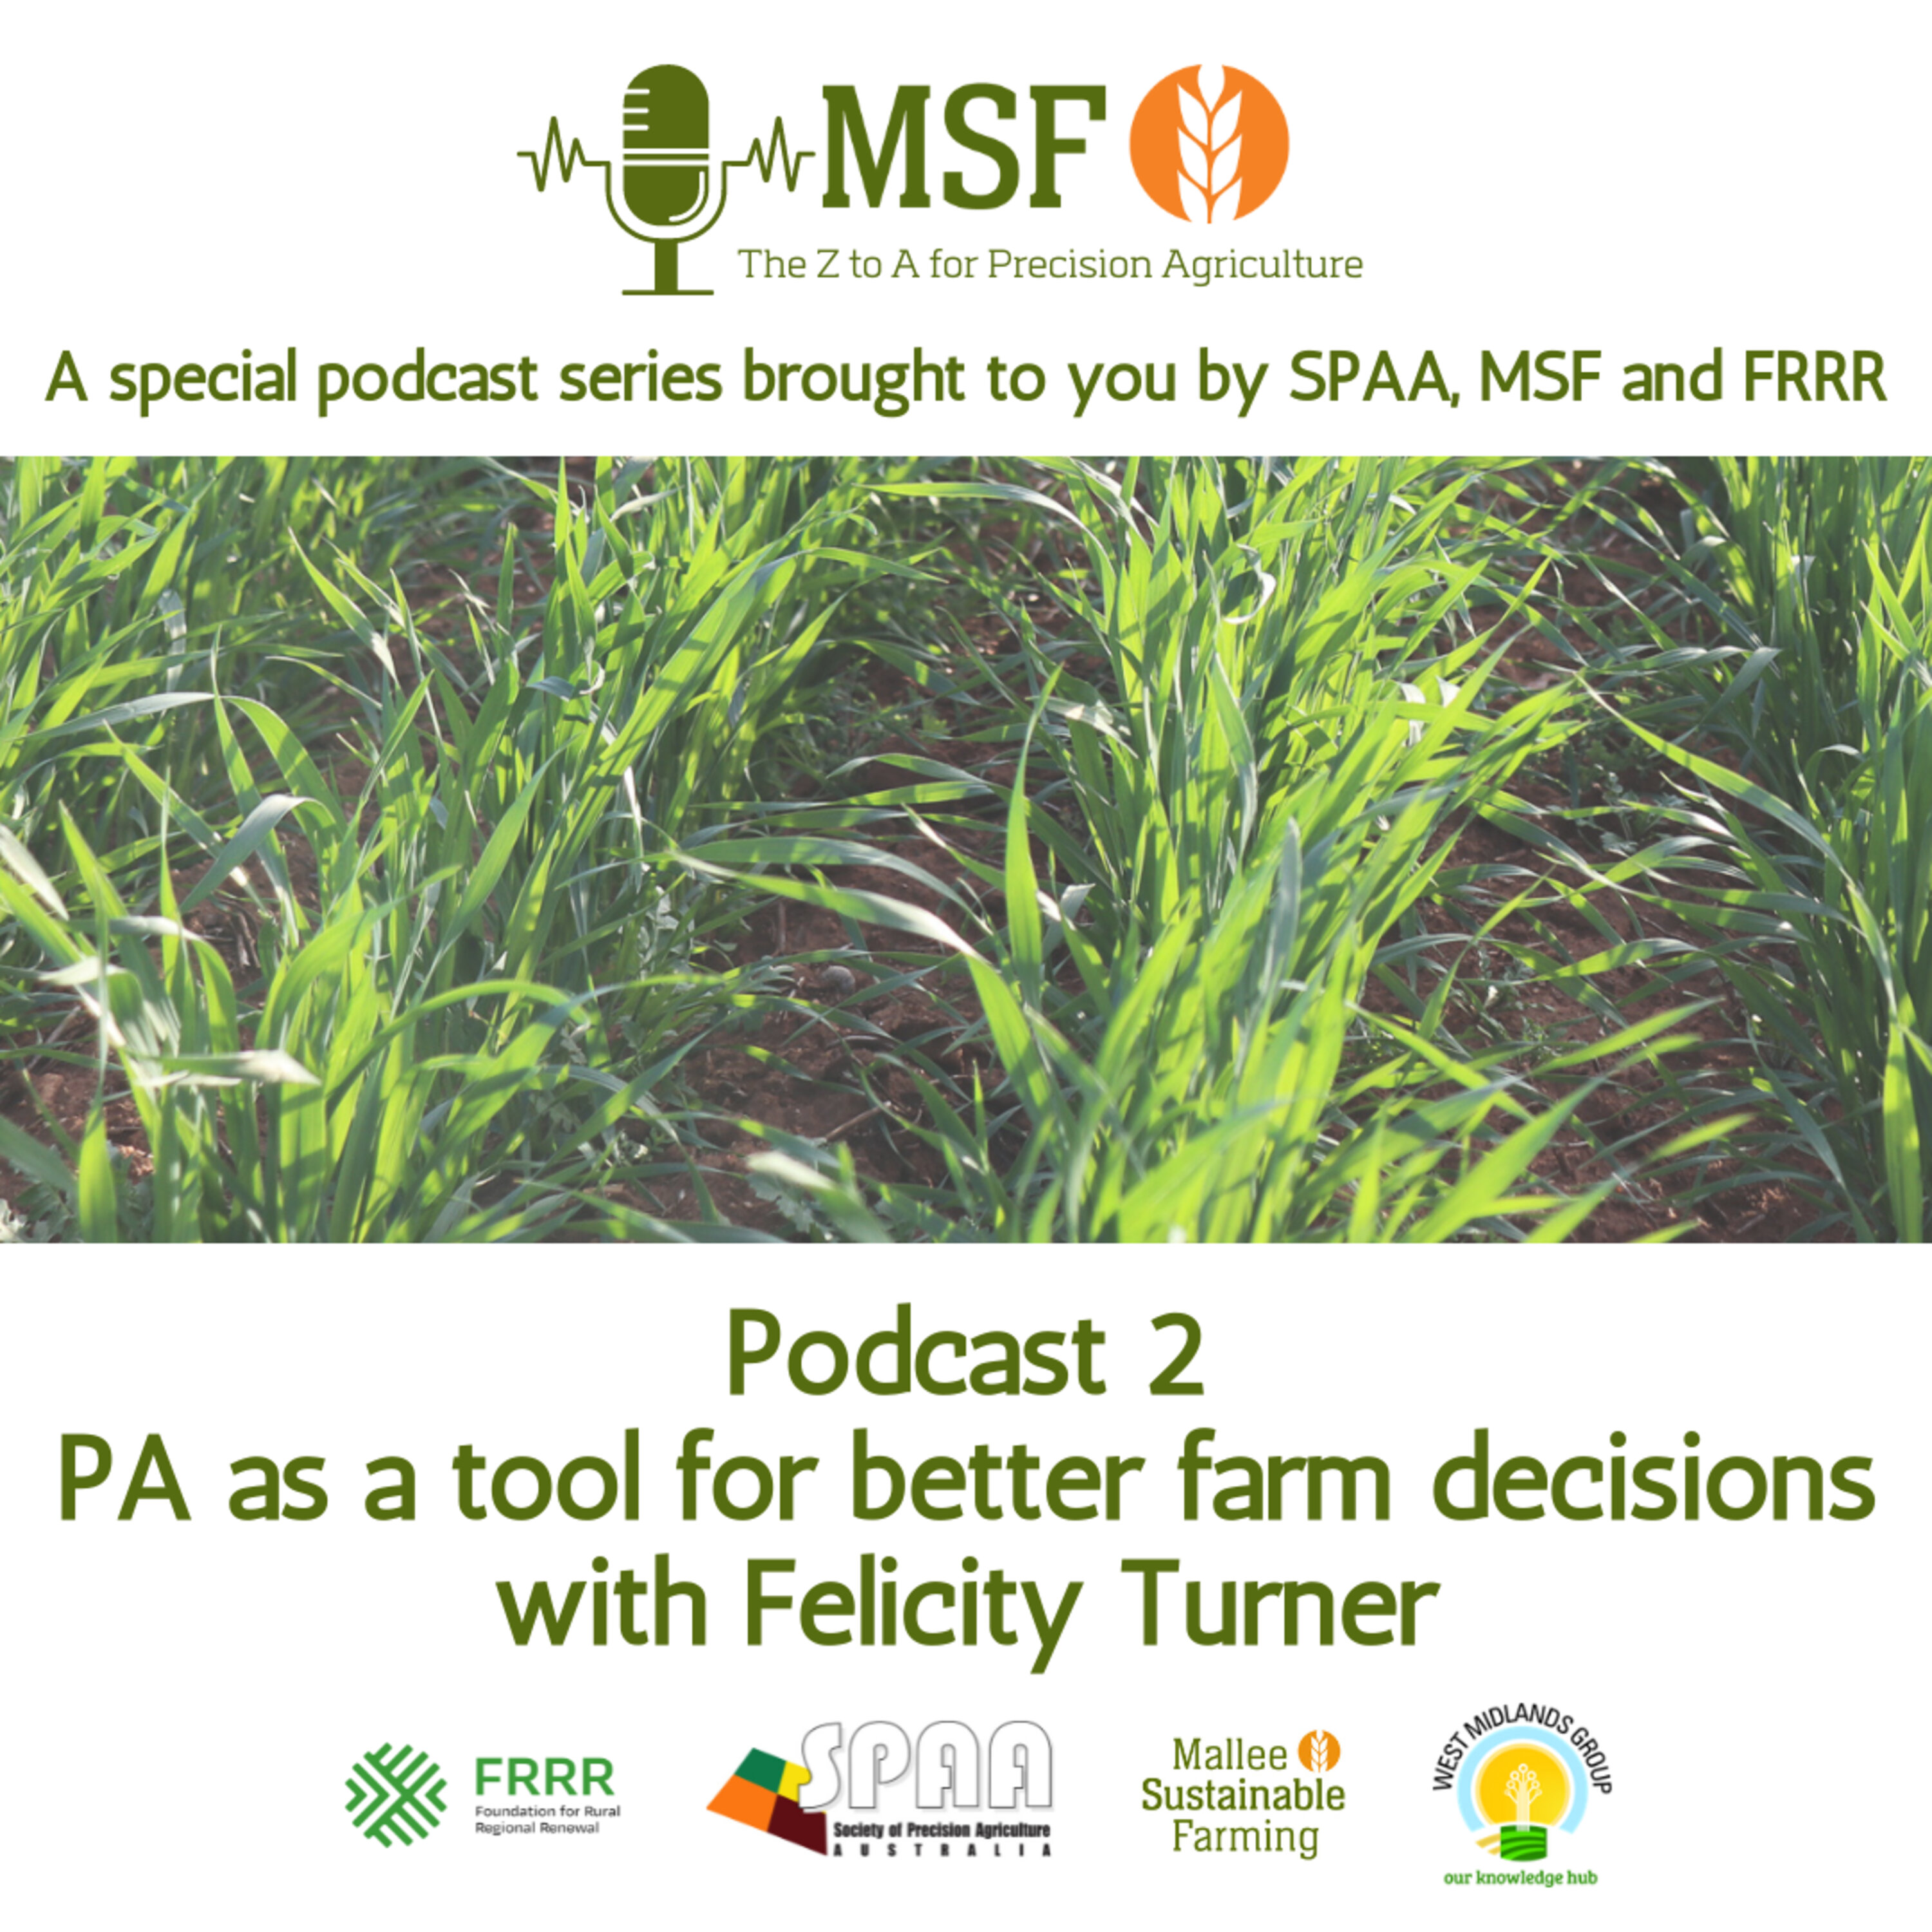 PA as a tool for better farm decisions with Felicity Turner